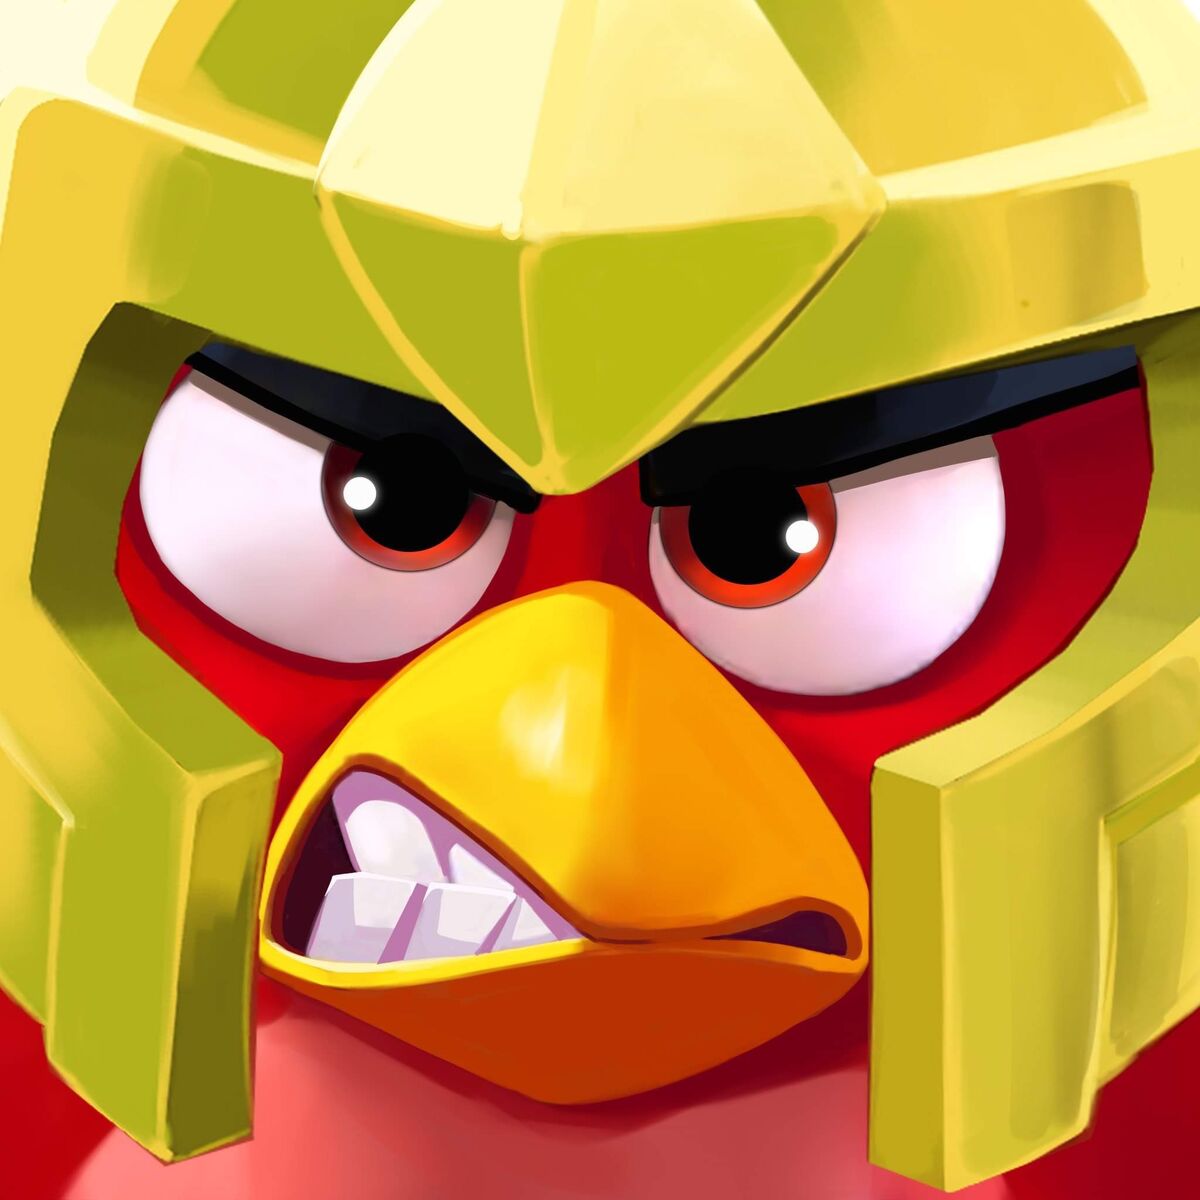 Angry Birds - The long awaited Official Angry Birds Epic Facebook